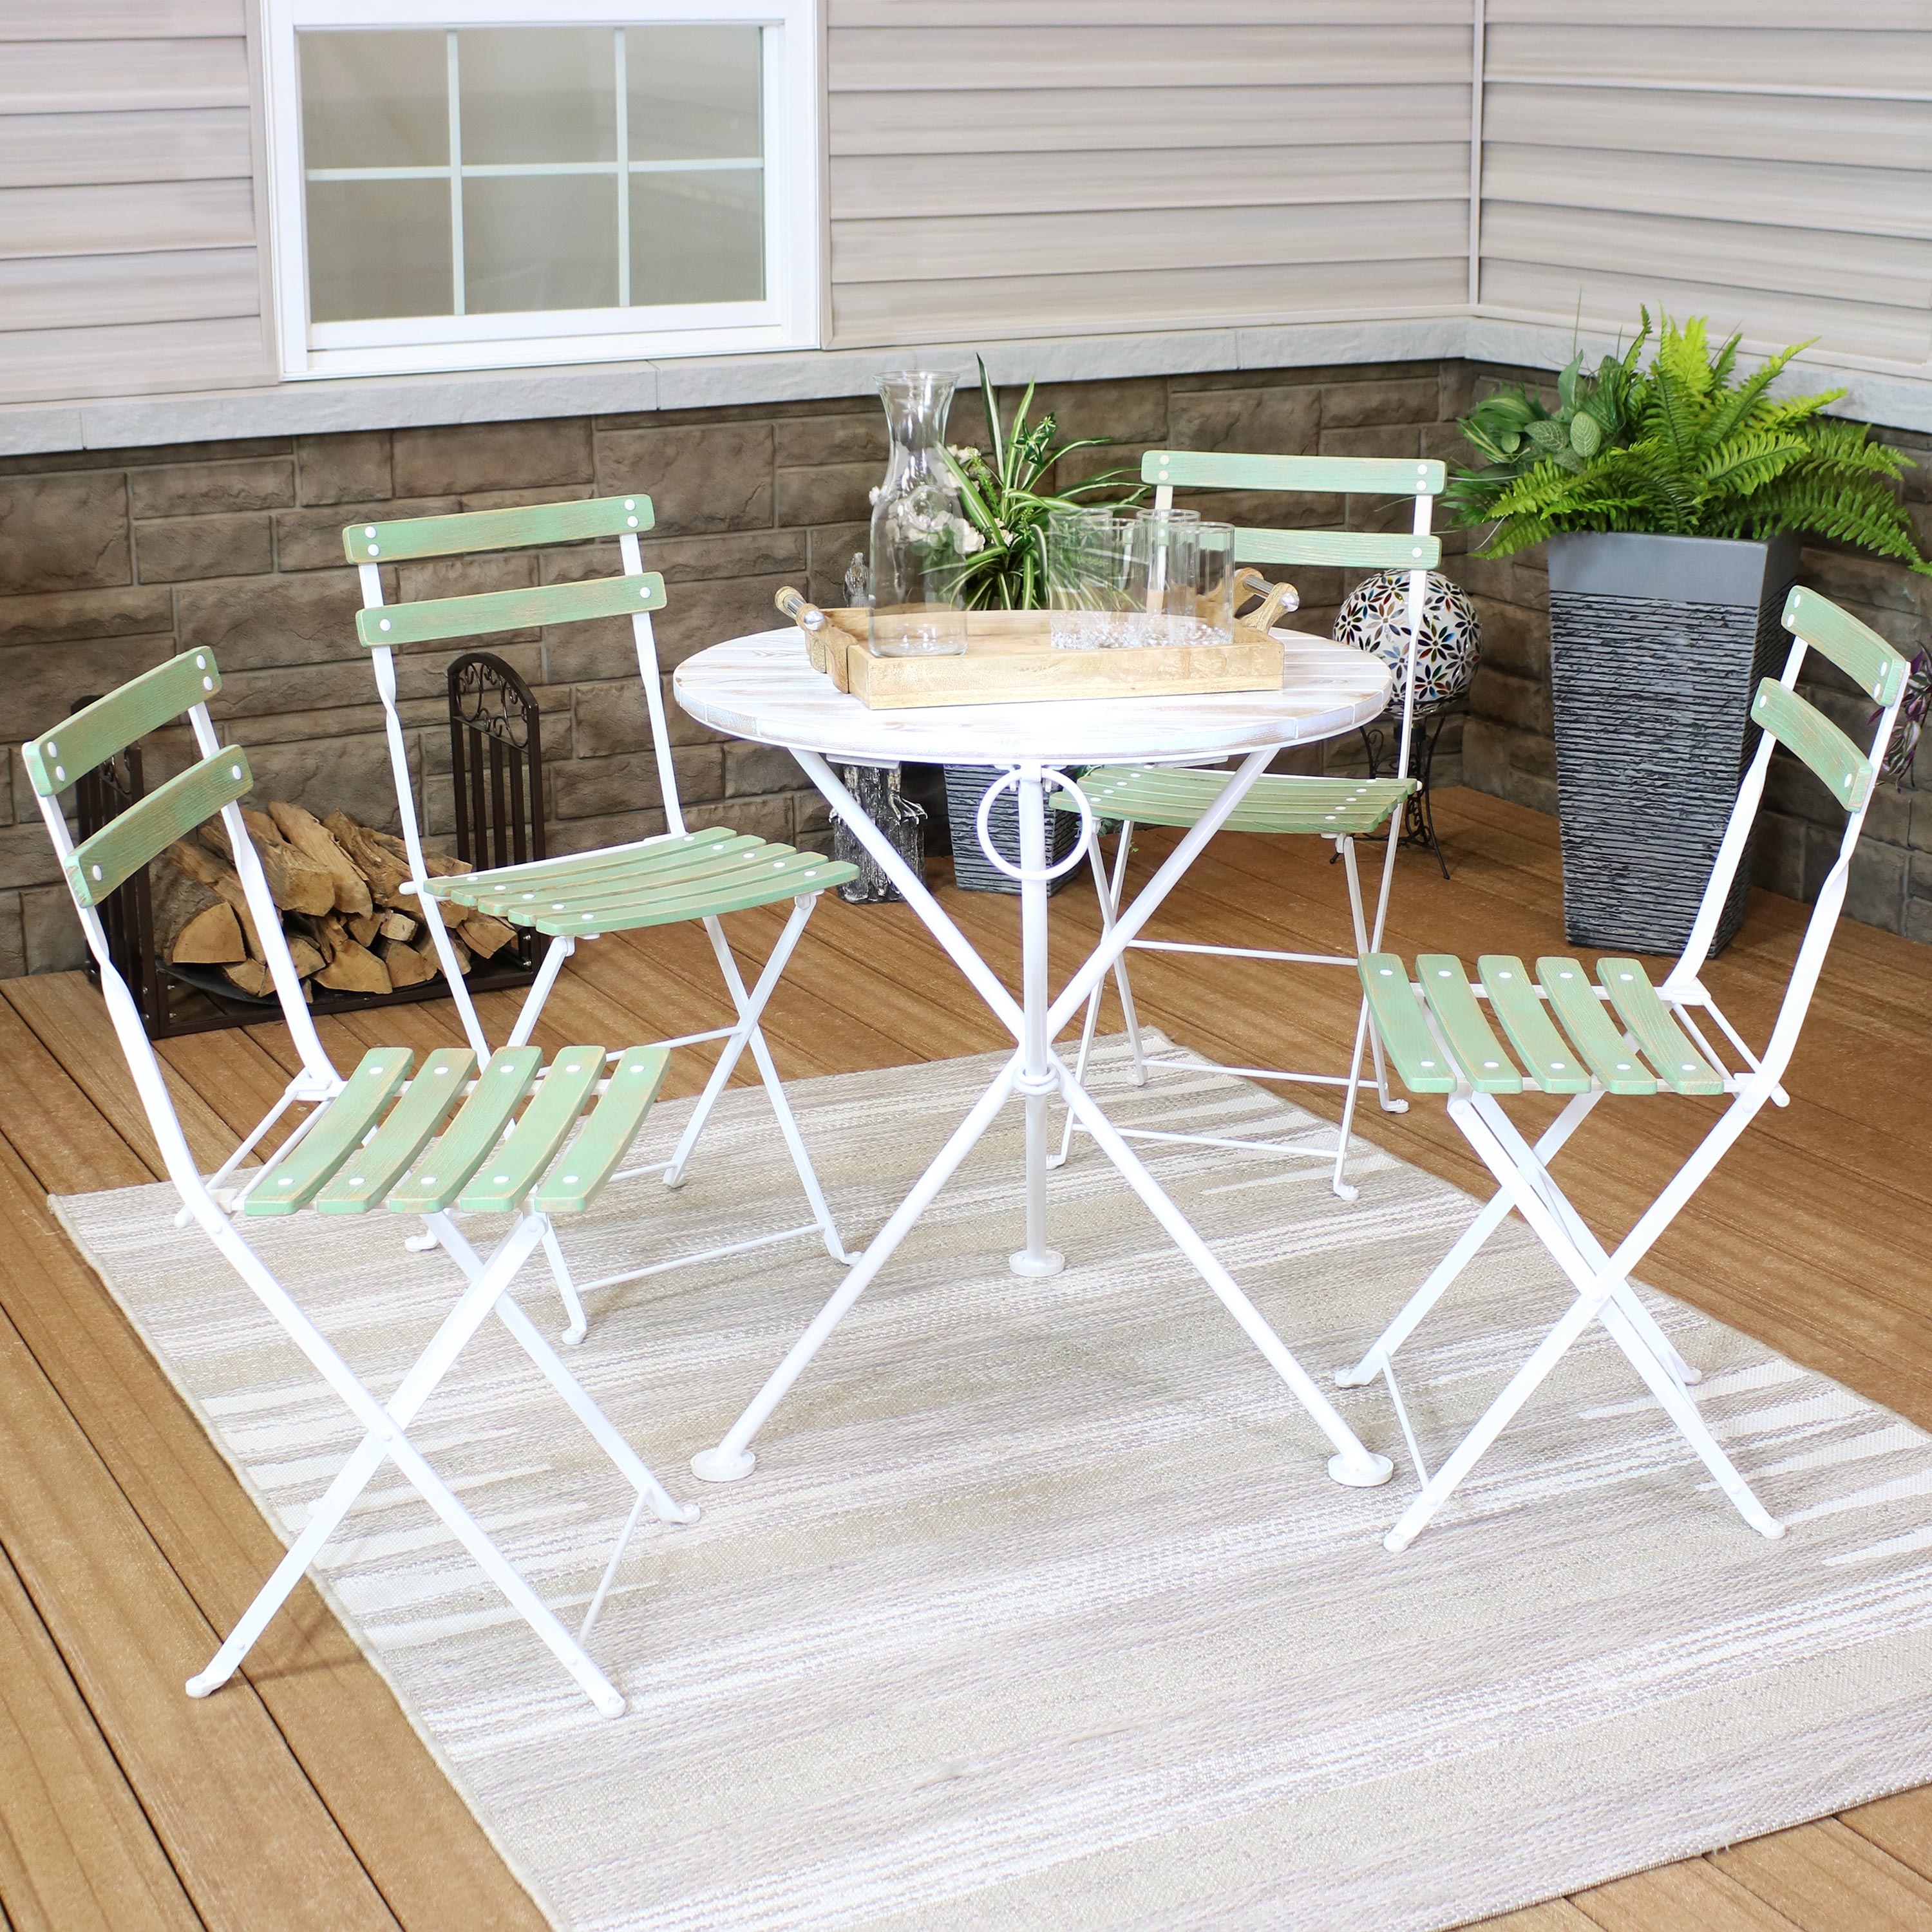 Sunnydaze Indoor/Outdoor Classic European Café Chestnut Wood Folding Bistro Table and Chairs - Antique Green - 5pc - image 2 of 9